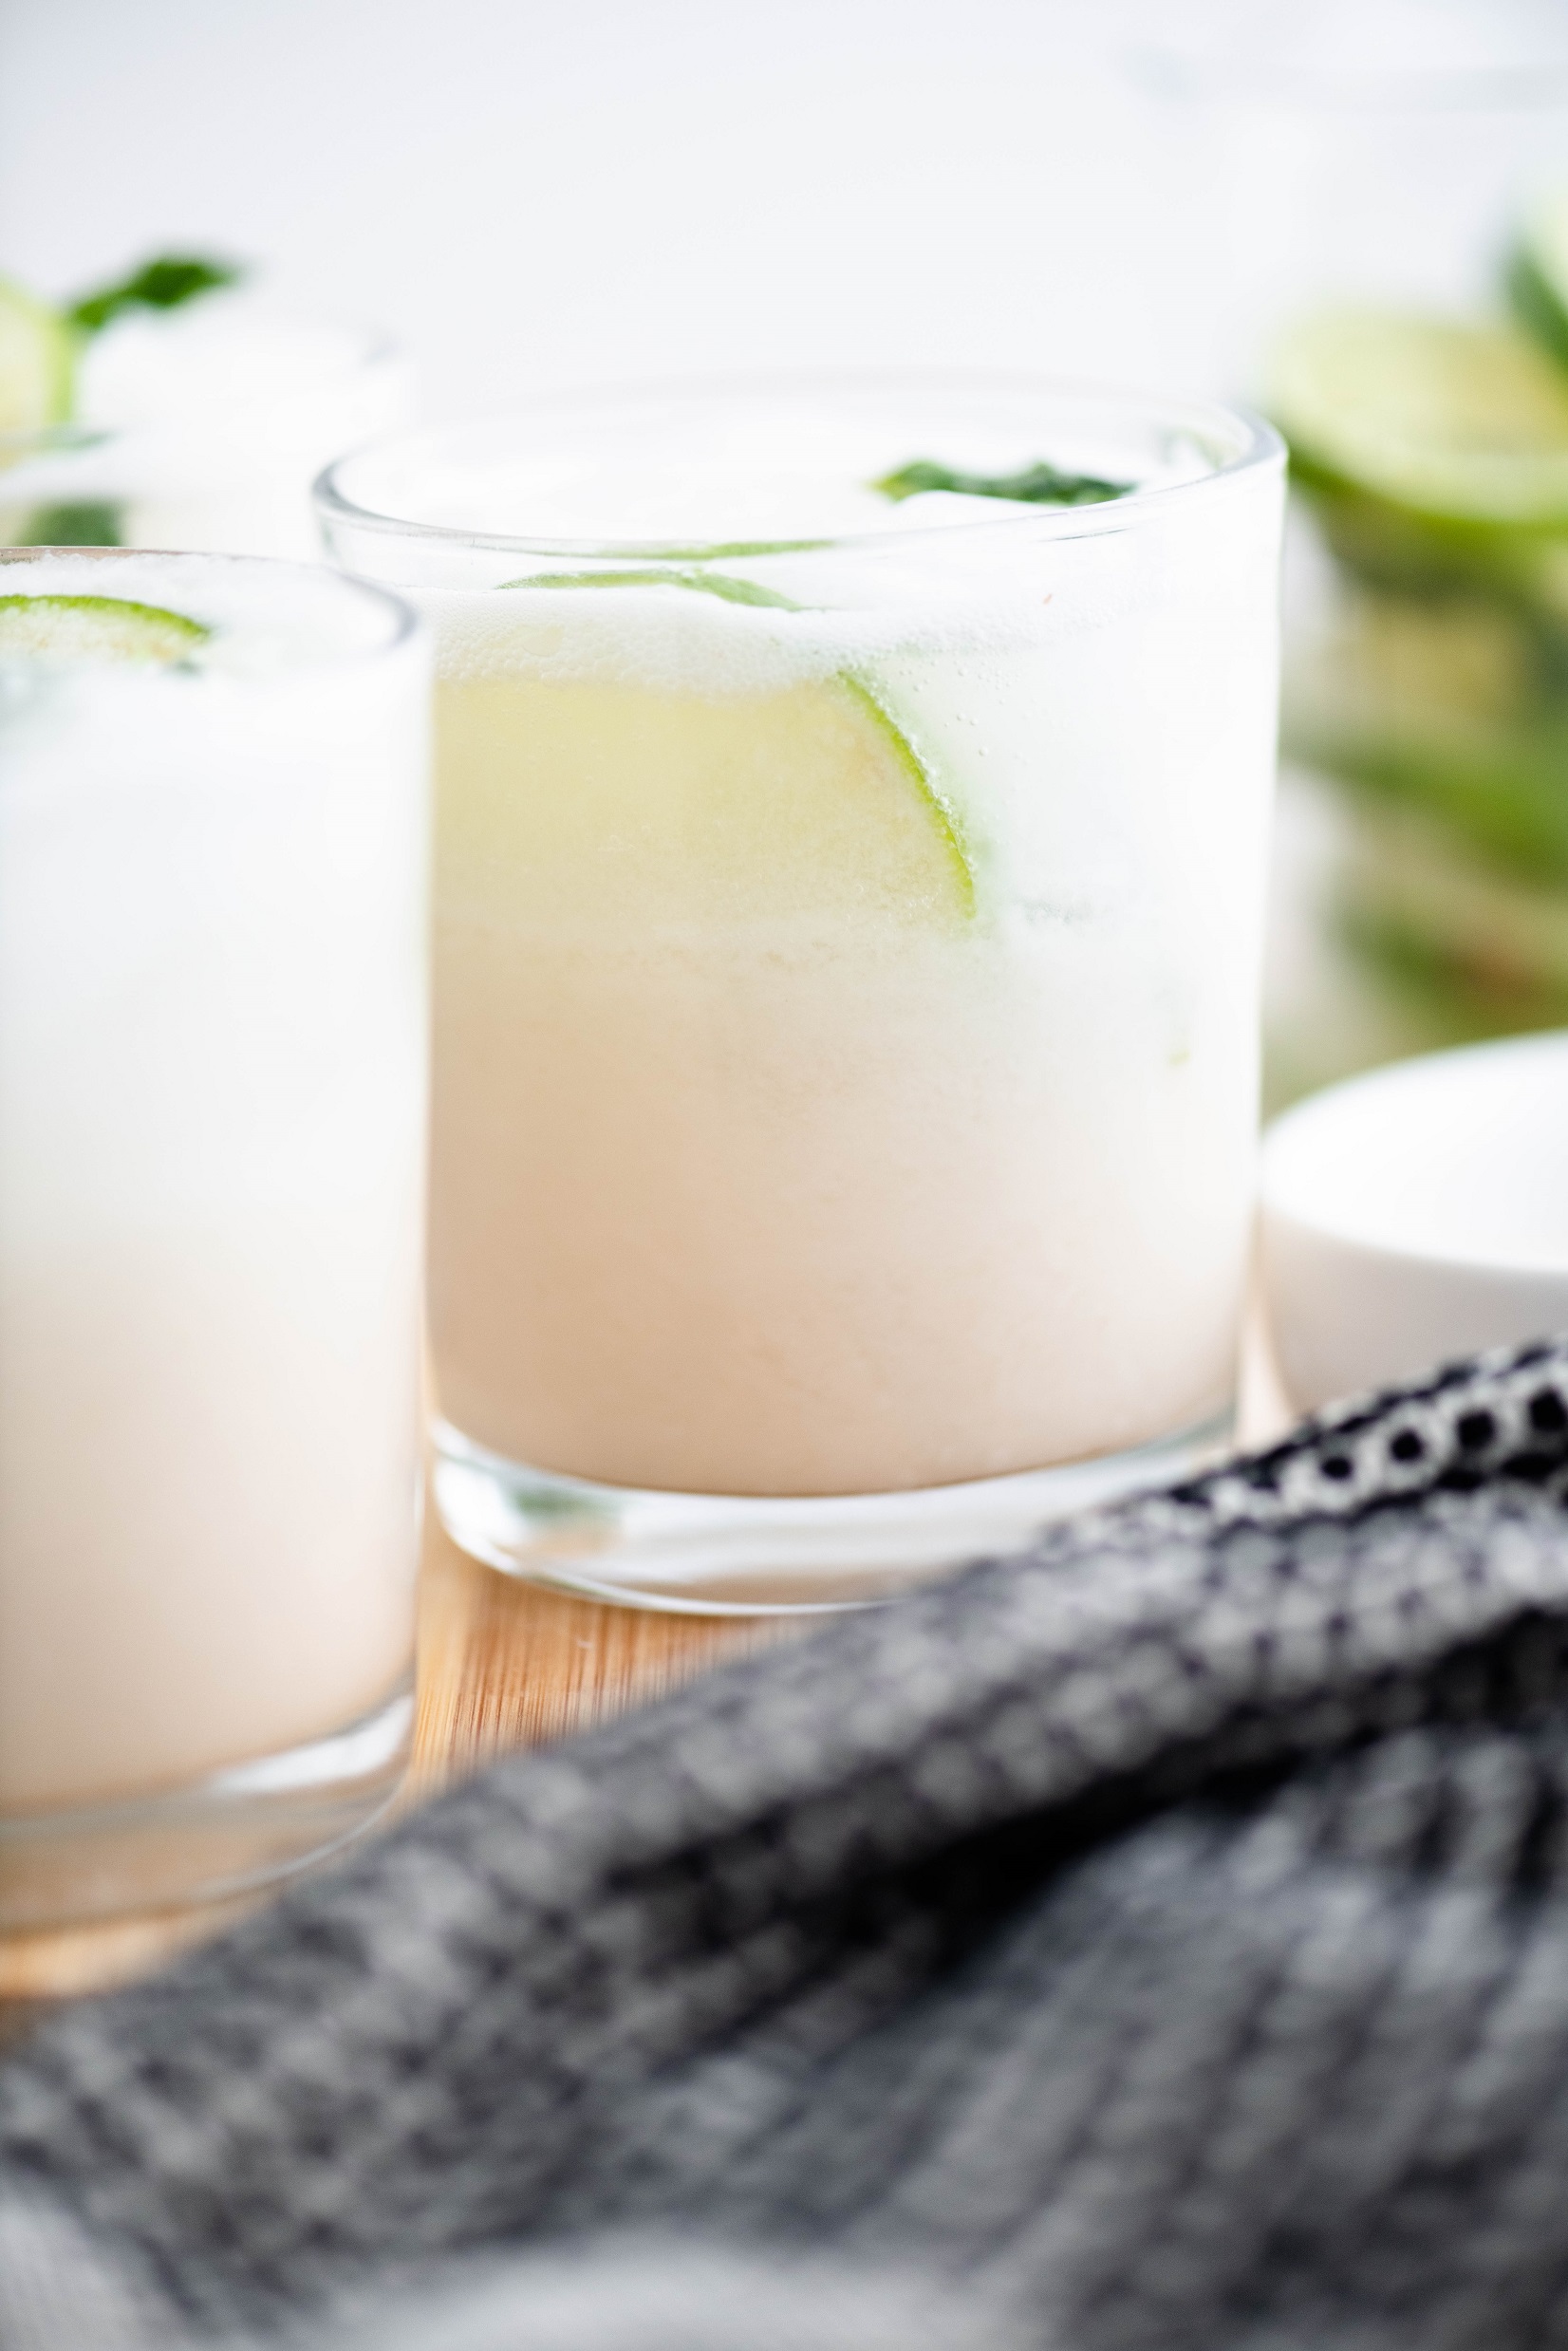 Mix up a few Coconut Mojitos for the ultimate tropical vibes at home. Packed full of sweet coconut flavor, this drink will quickly become a summertime favorite.